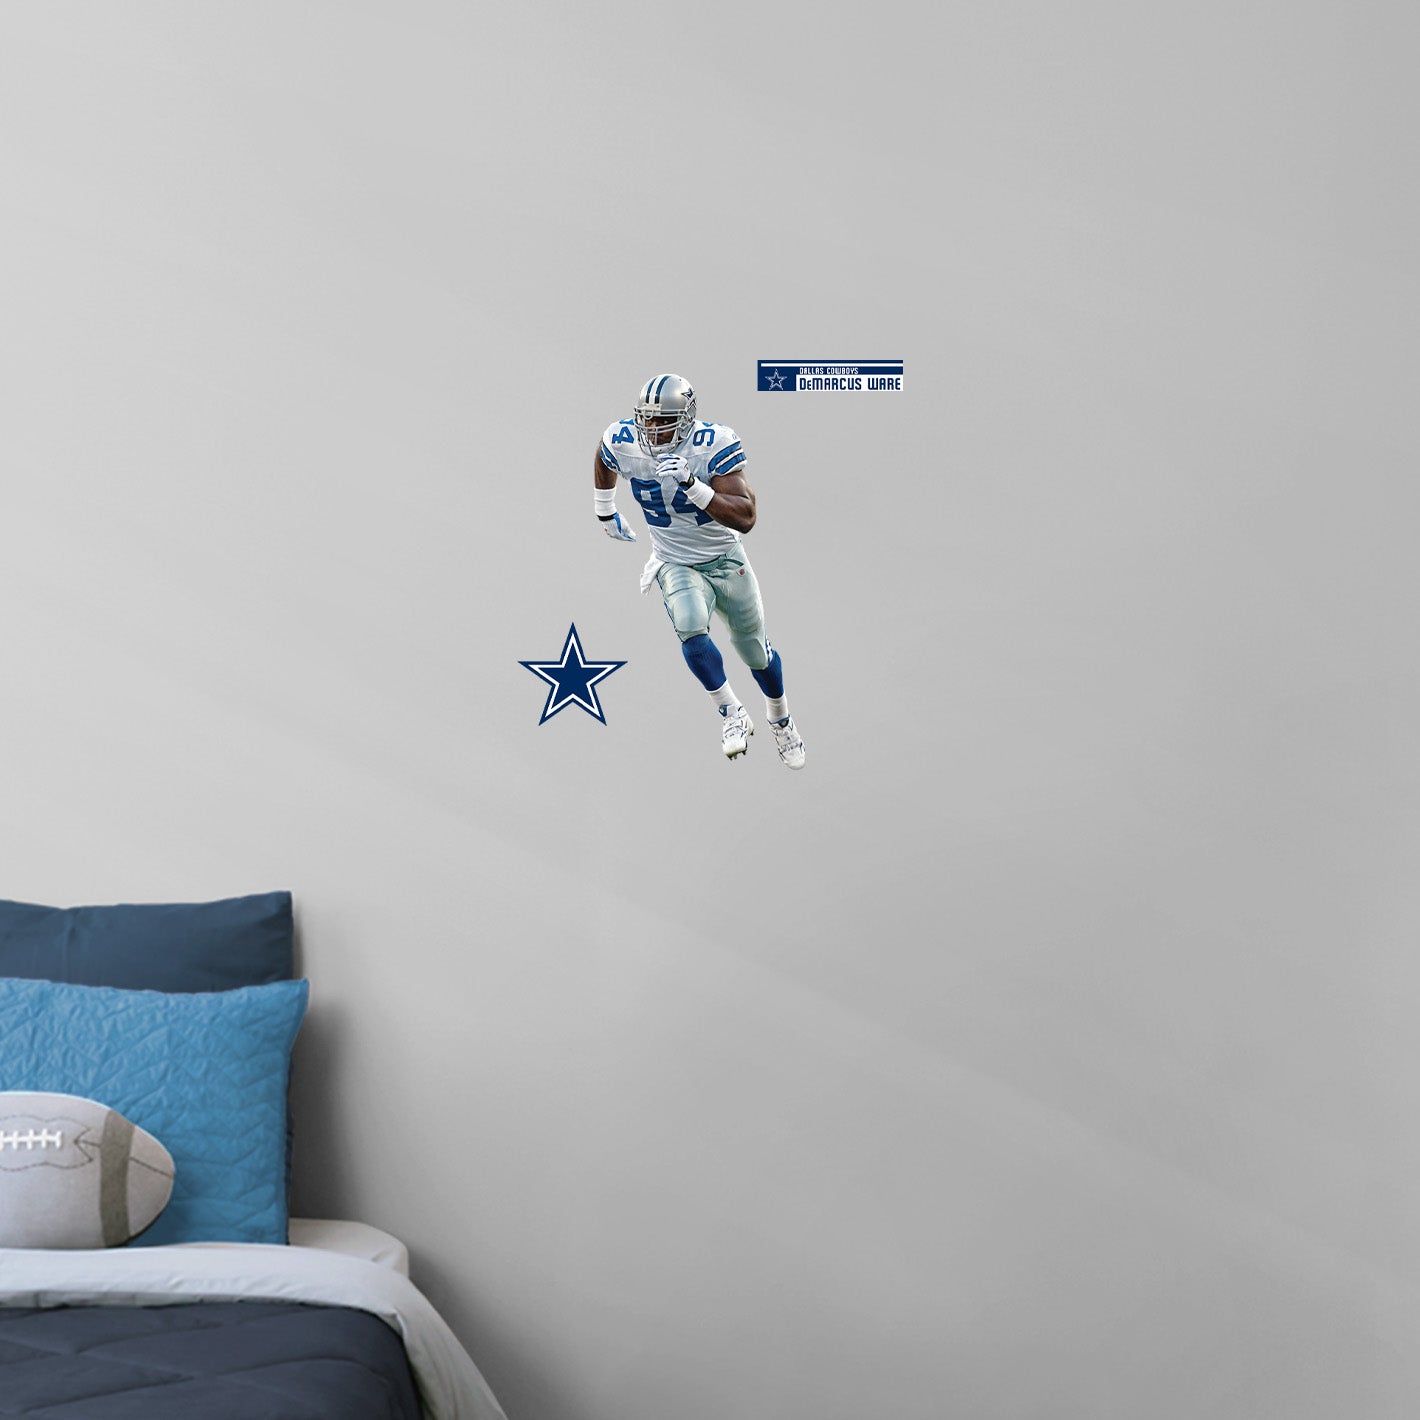 Dallas Cowboys: DeMarcus Ware Legend - Officially Licensed NFL Removable Adhesive Decal